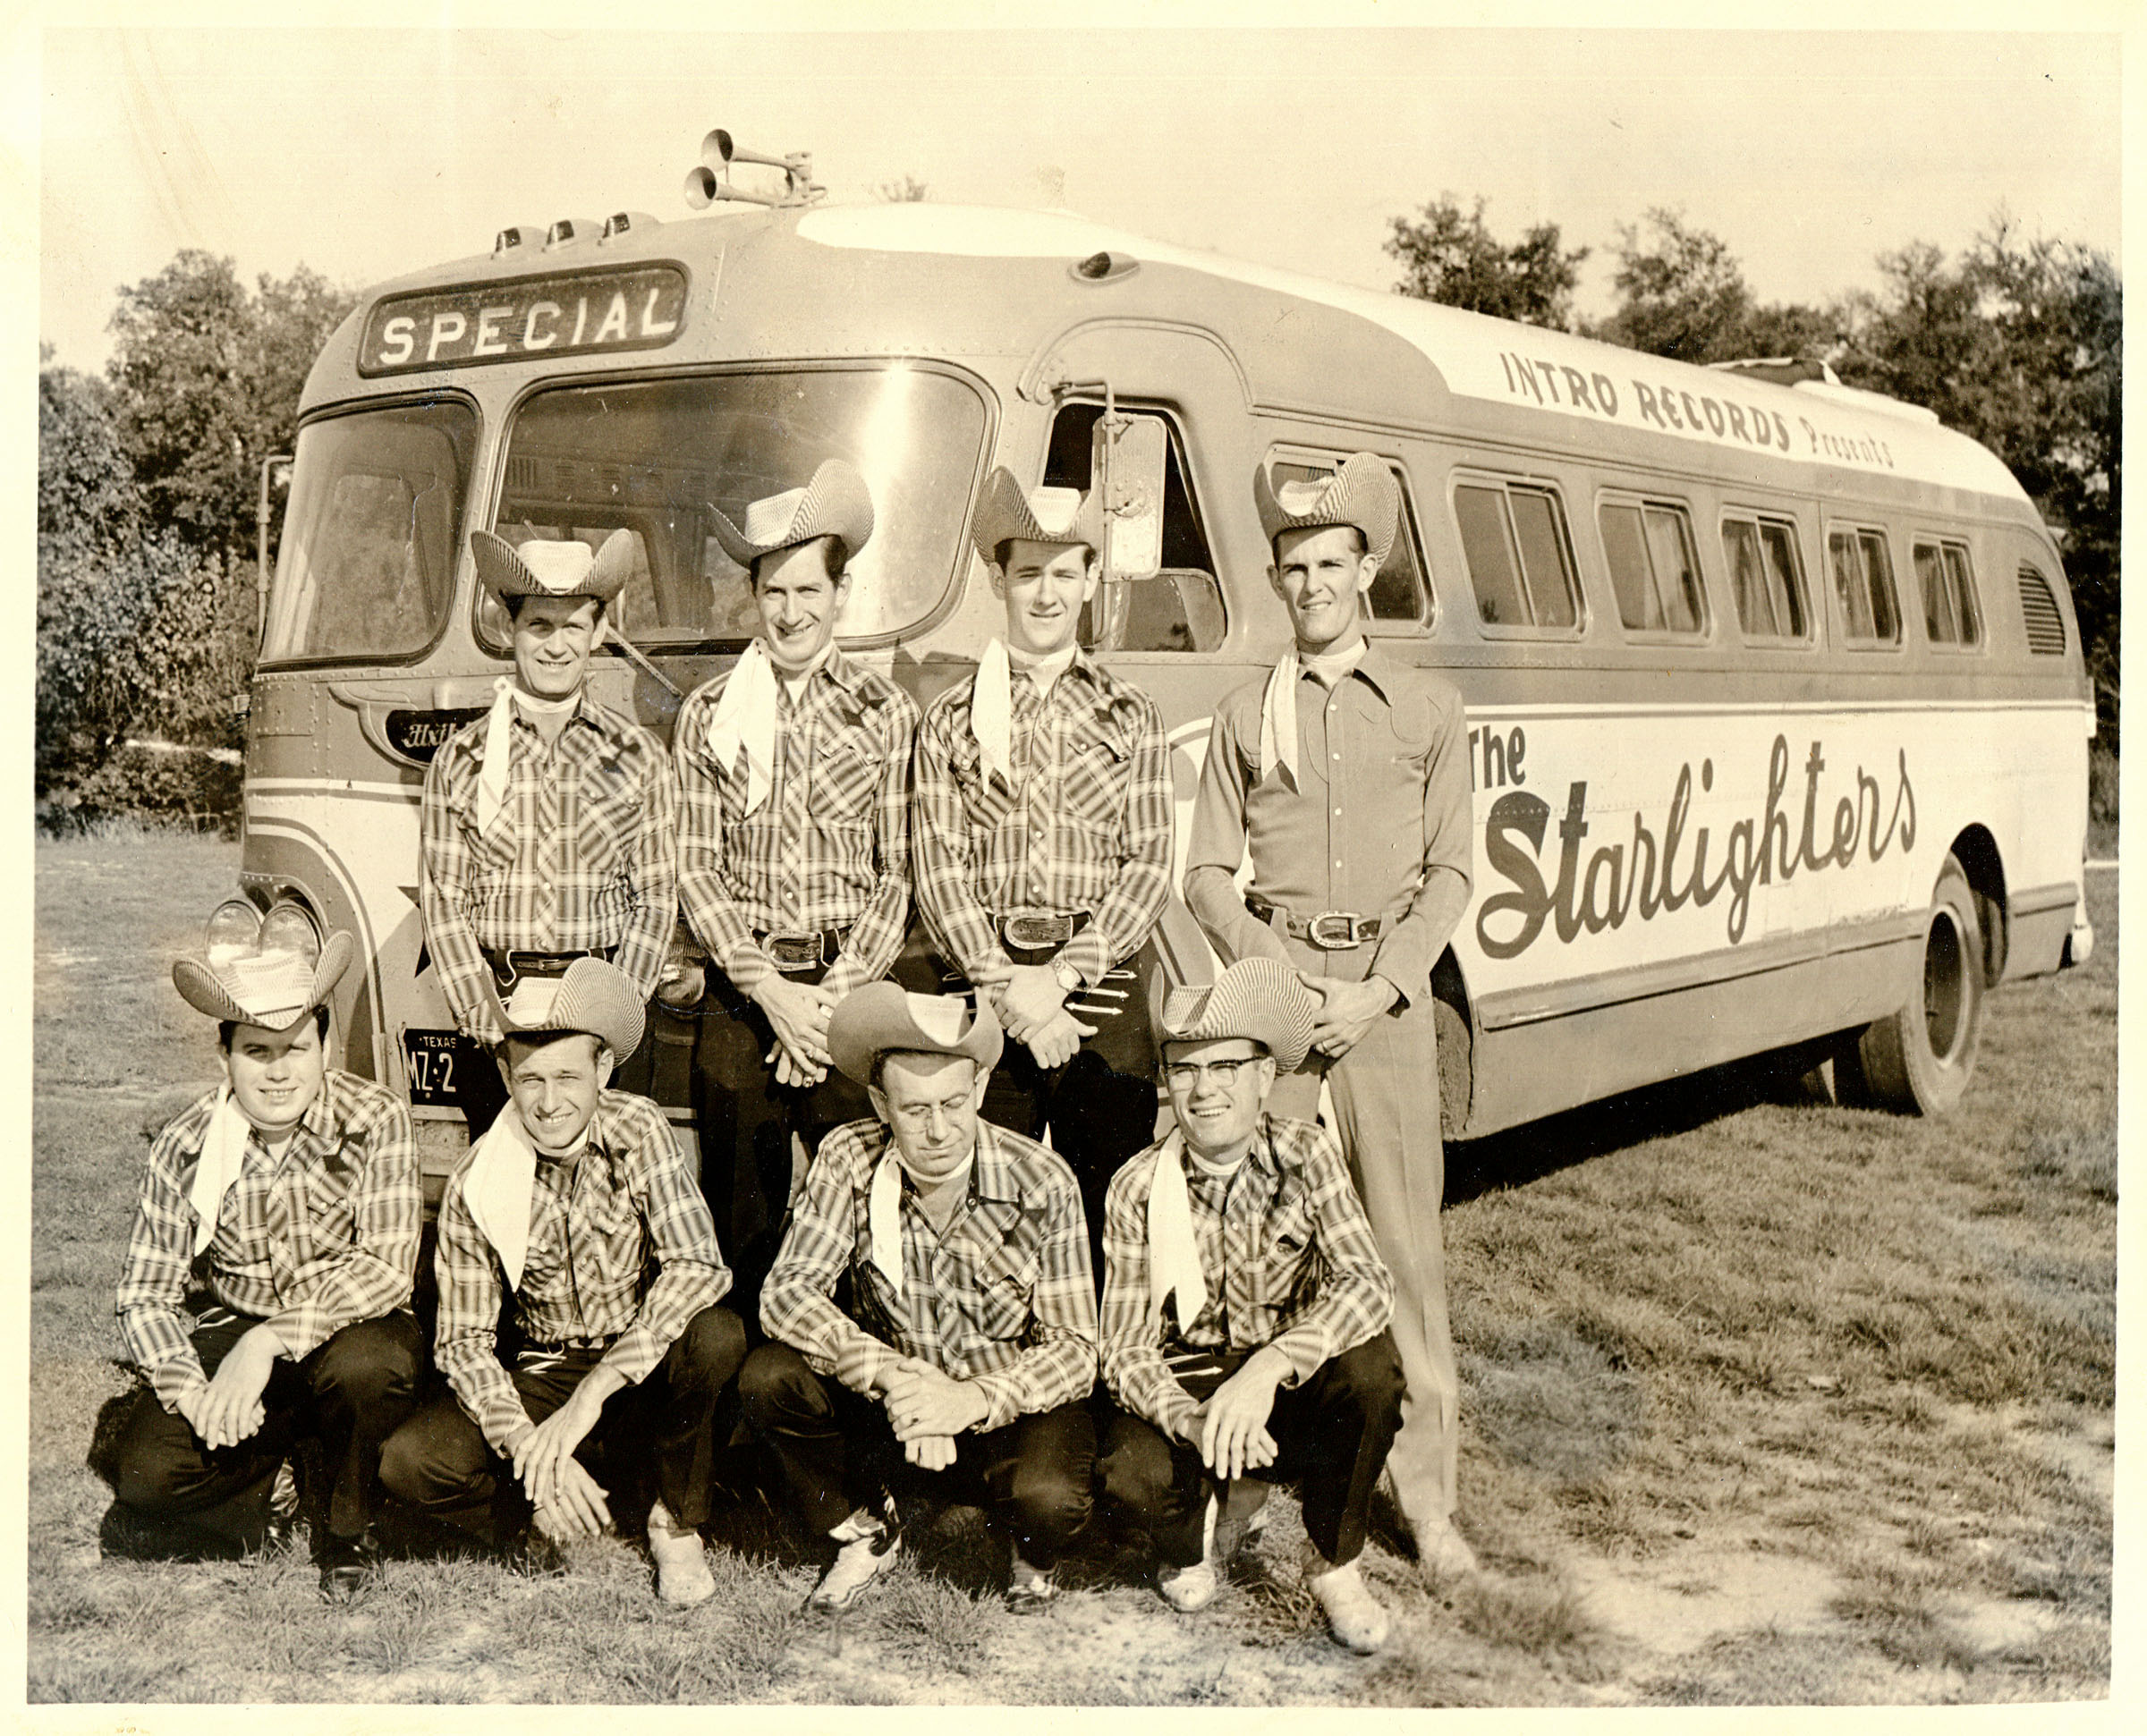 A group of people in bent, curved cowboy hats stand out front of a bus